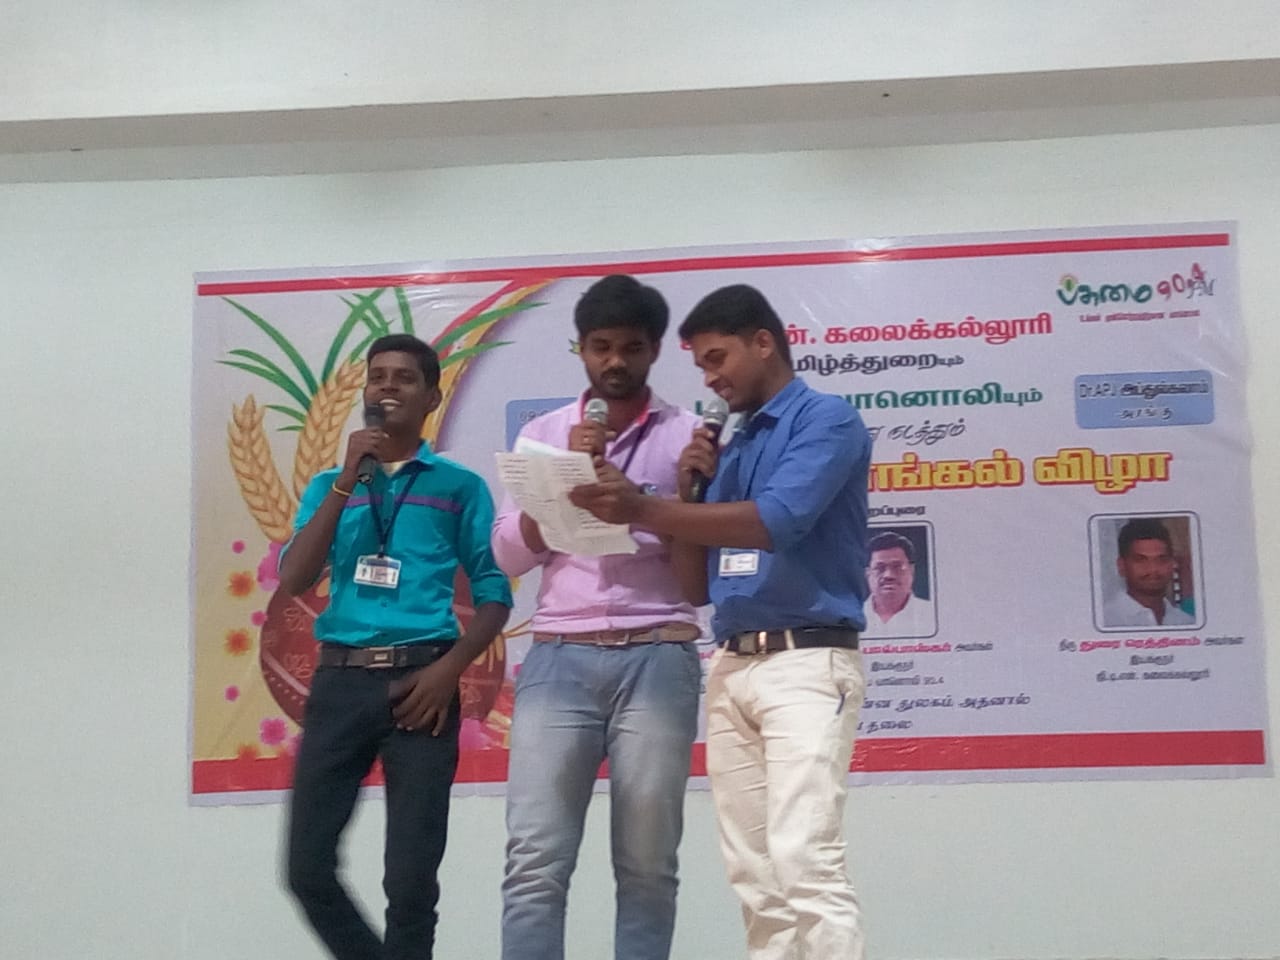 Pongal festival celebration programme at GTN Arts and Science College    Dindigul 09.01.2019